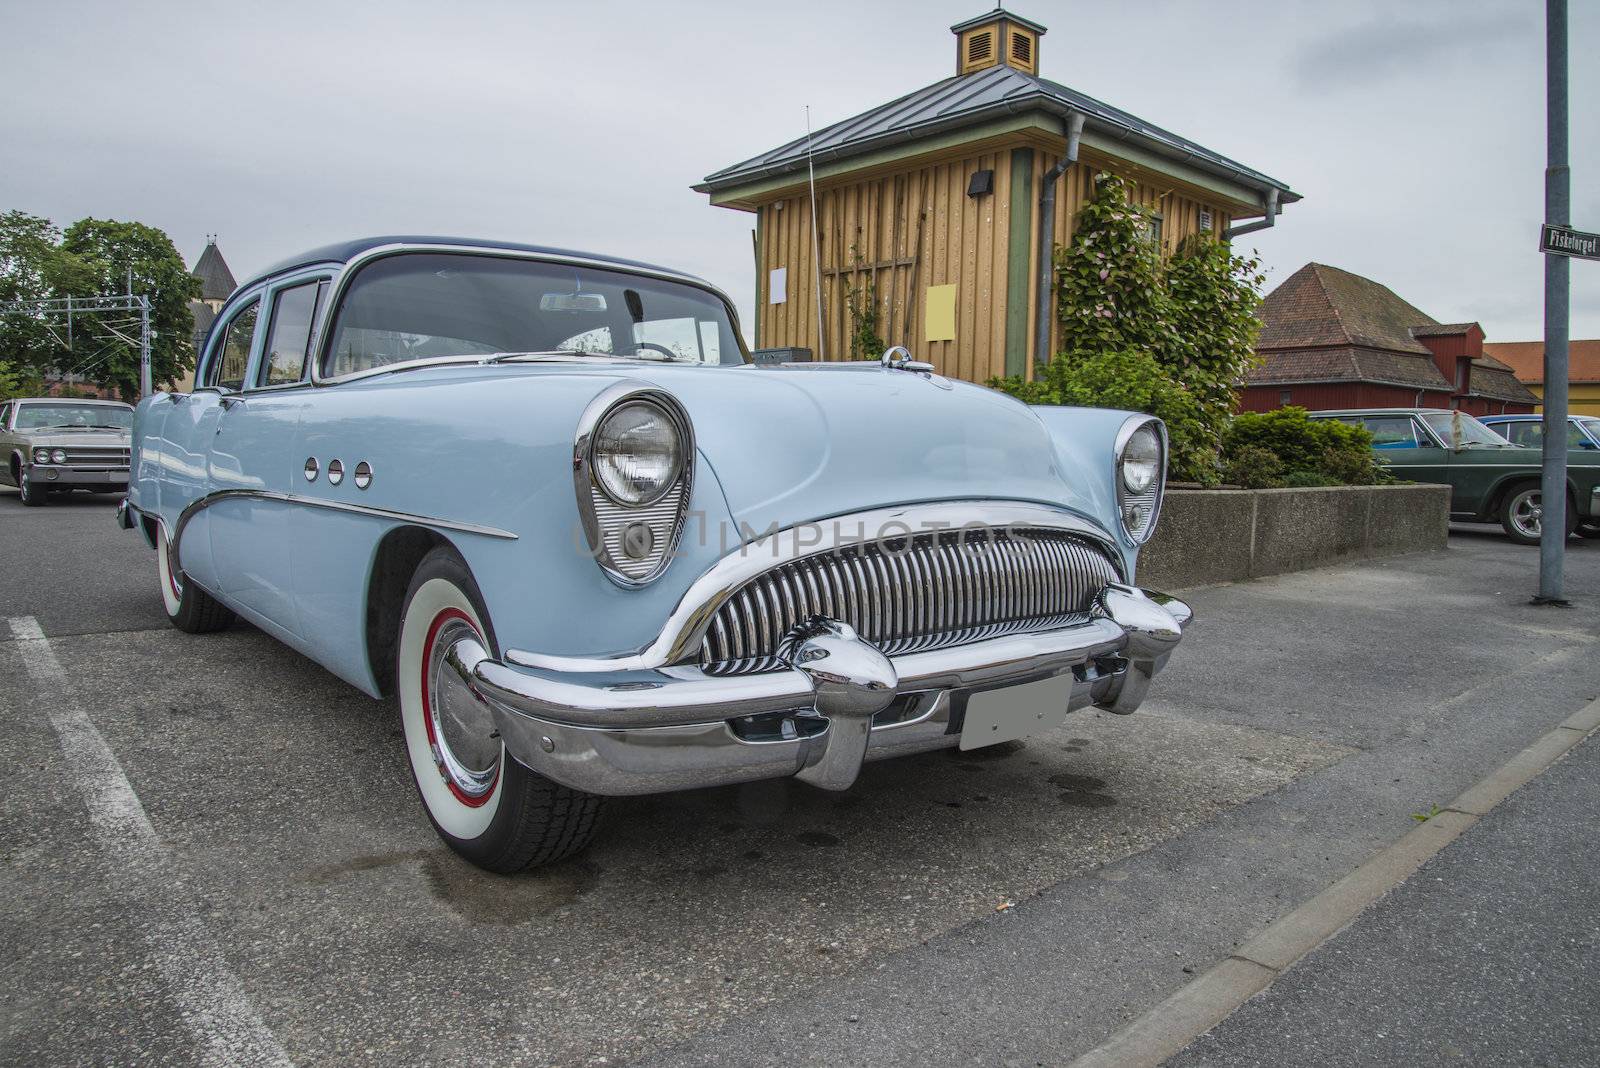 The image is shot at a fish-market in Halden, Norway where there every Wednesday during the summer months are held classic American car show.